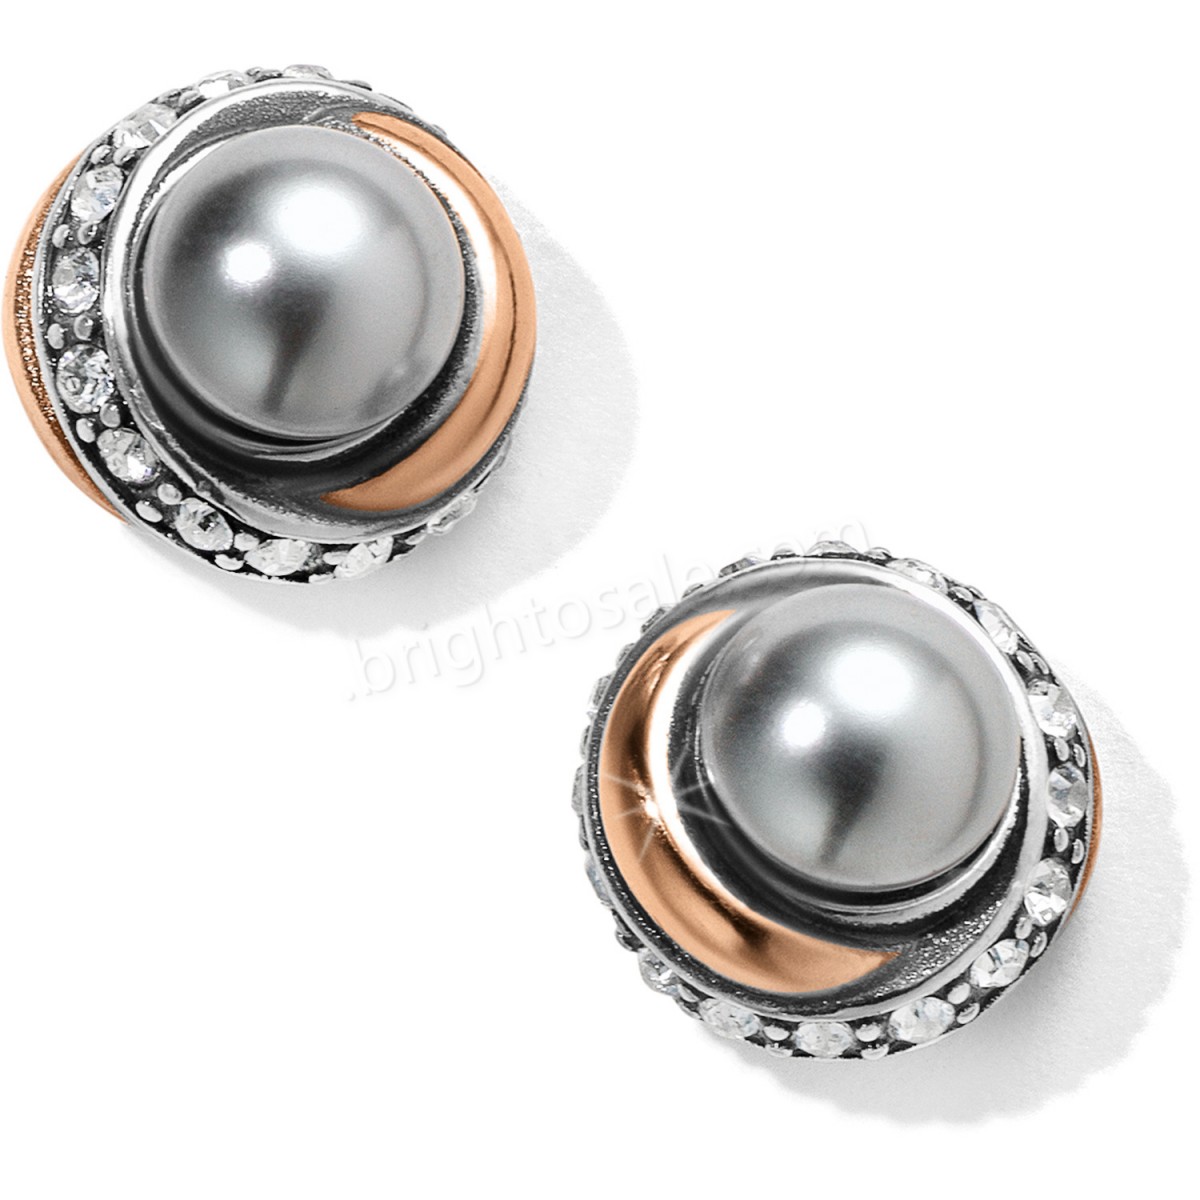 Brighton Collectibles & Online Discount Neptune's Rings Gray Pearl Button Earrings - -0